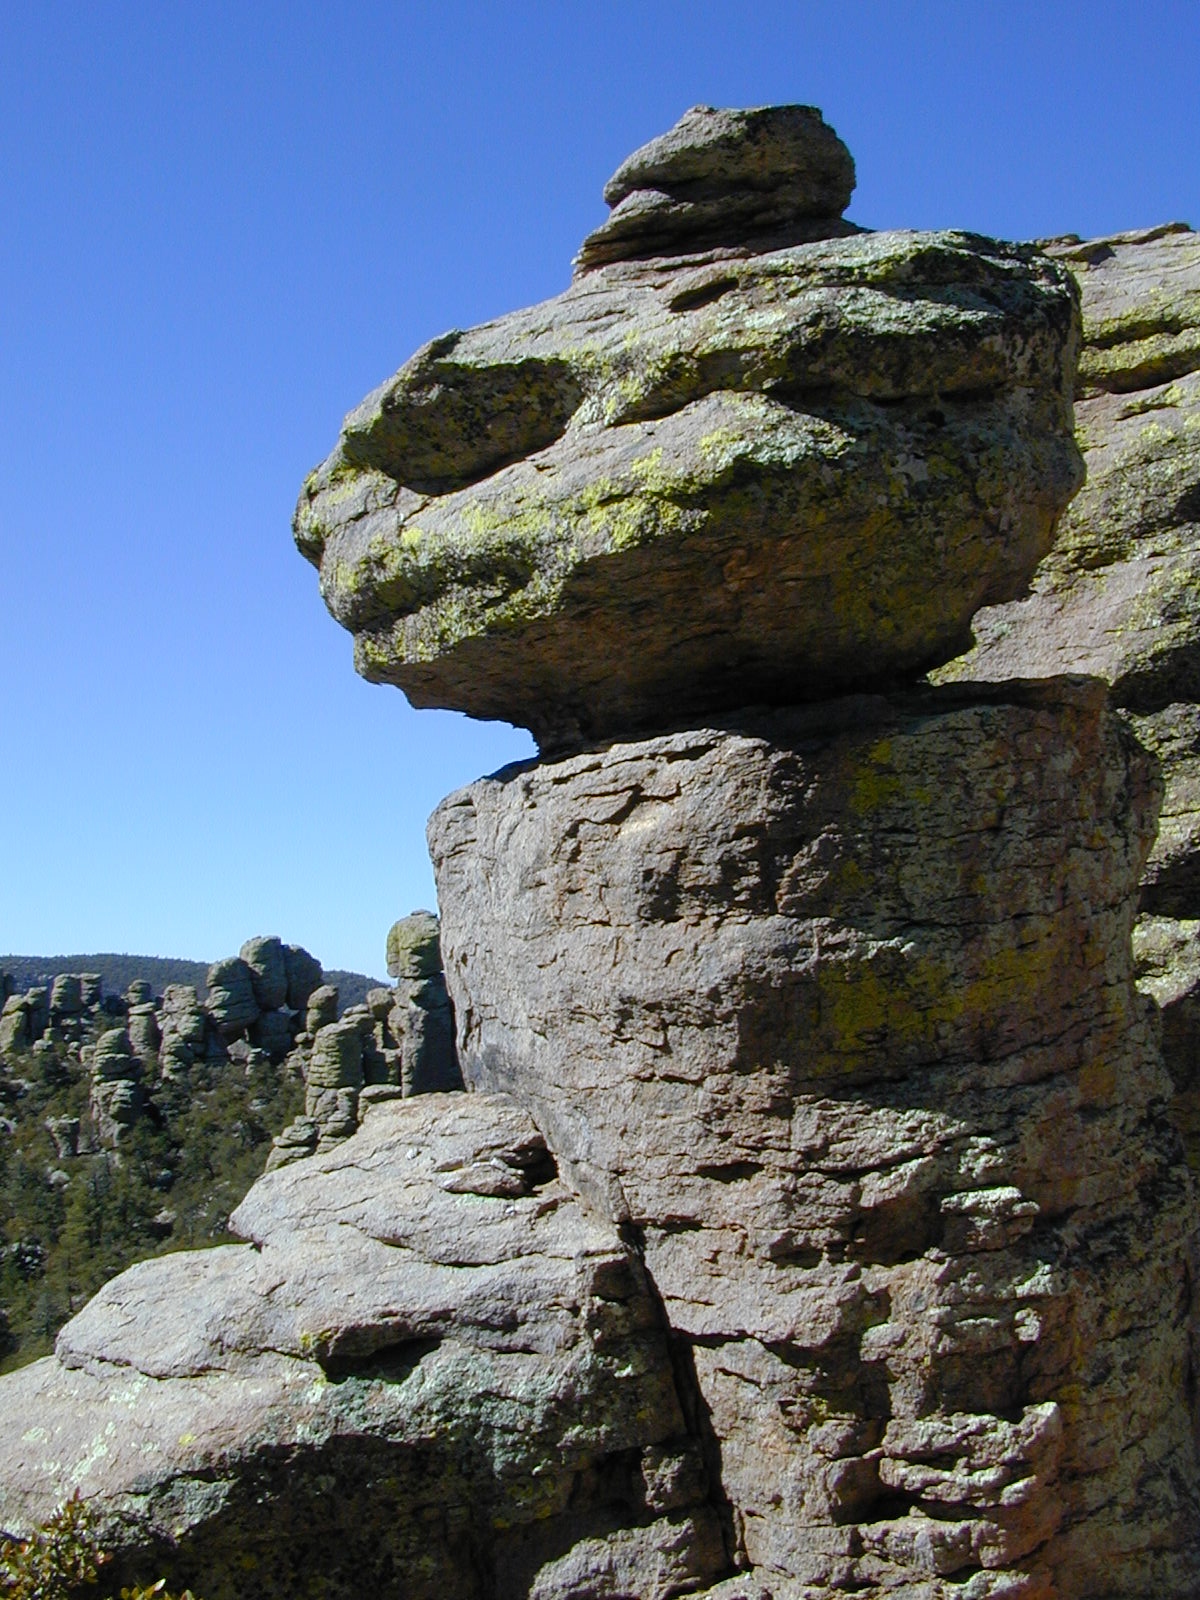 Chiricahua National Monument ©2015 by Ken Gilliland